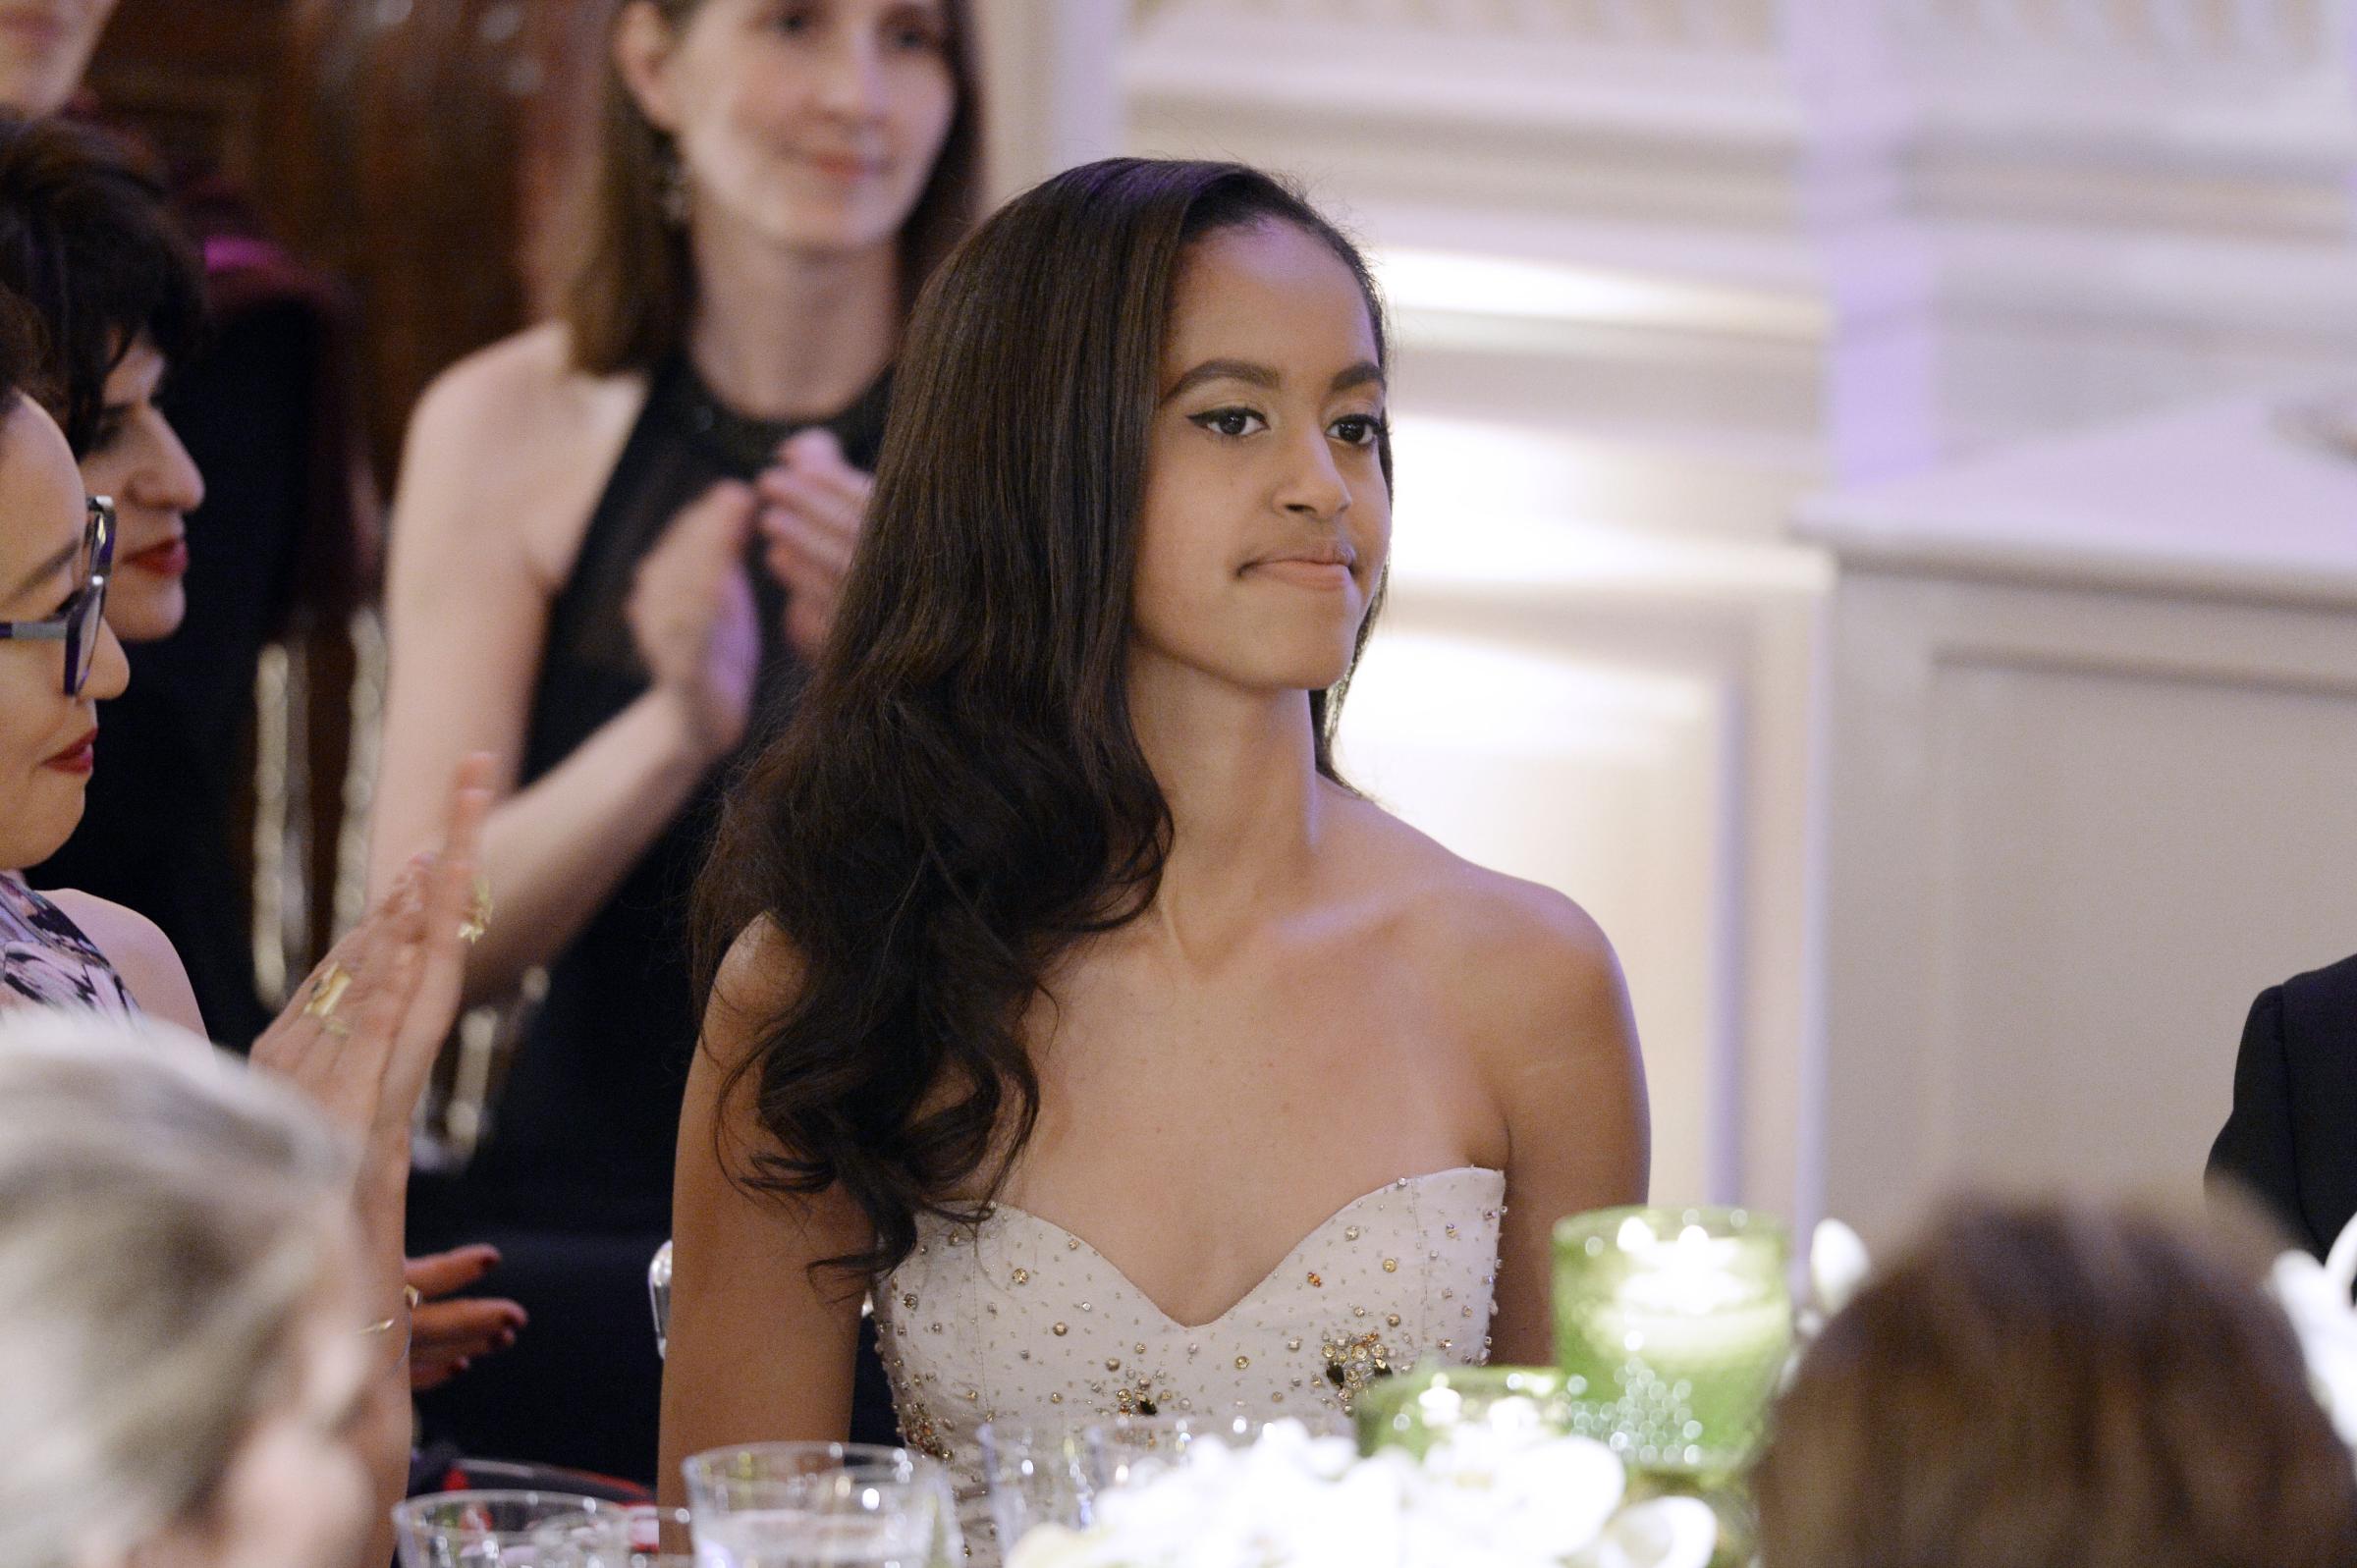 March 10, 2016 Malia Obama attends a State Dinner at the White House in honor of Prime Minister Justin Trudeau and First Lady Sophie Gregoire Trudeau of Canada.